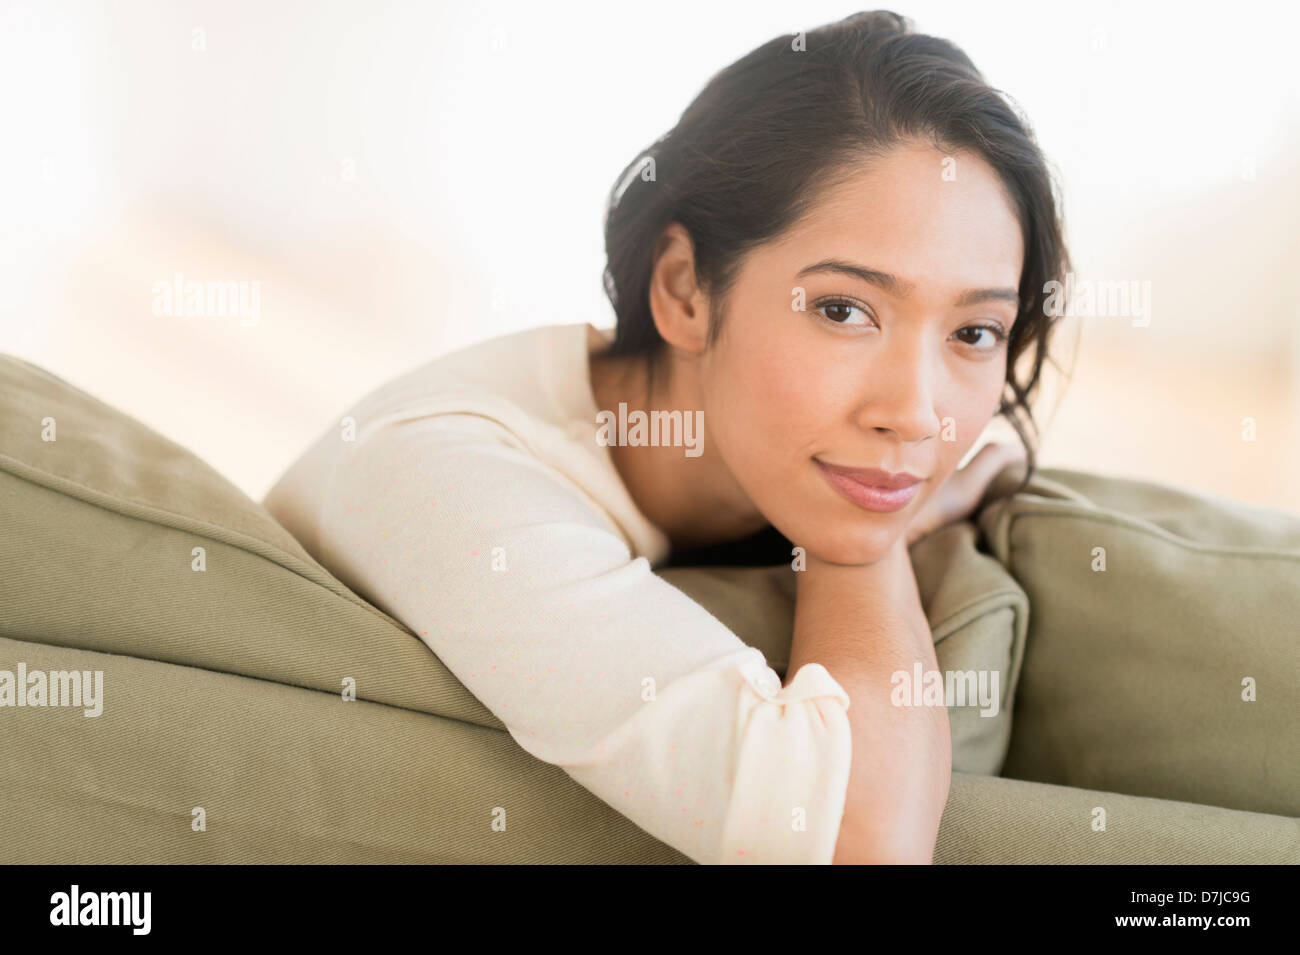 Portrait of young woman sitting on couch Banque D'Images